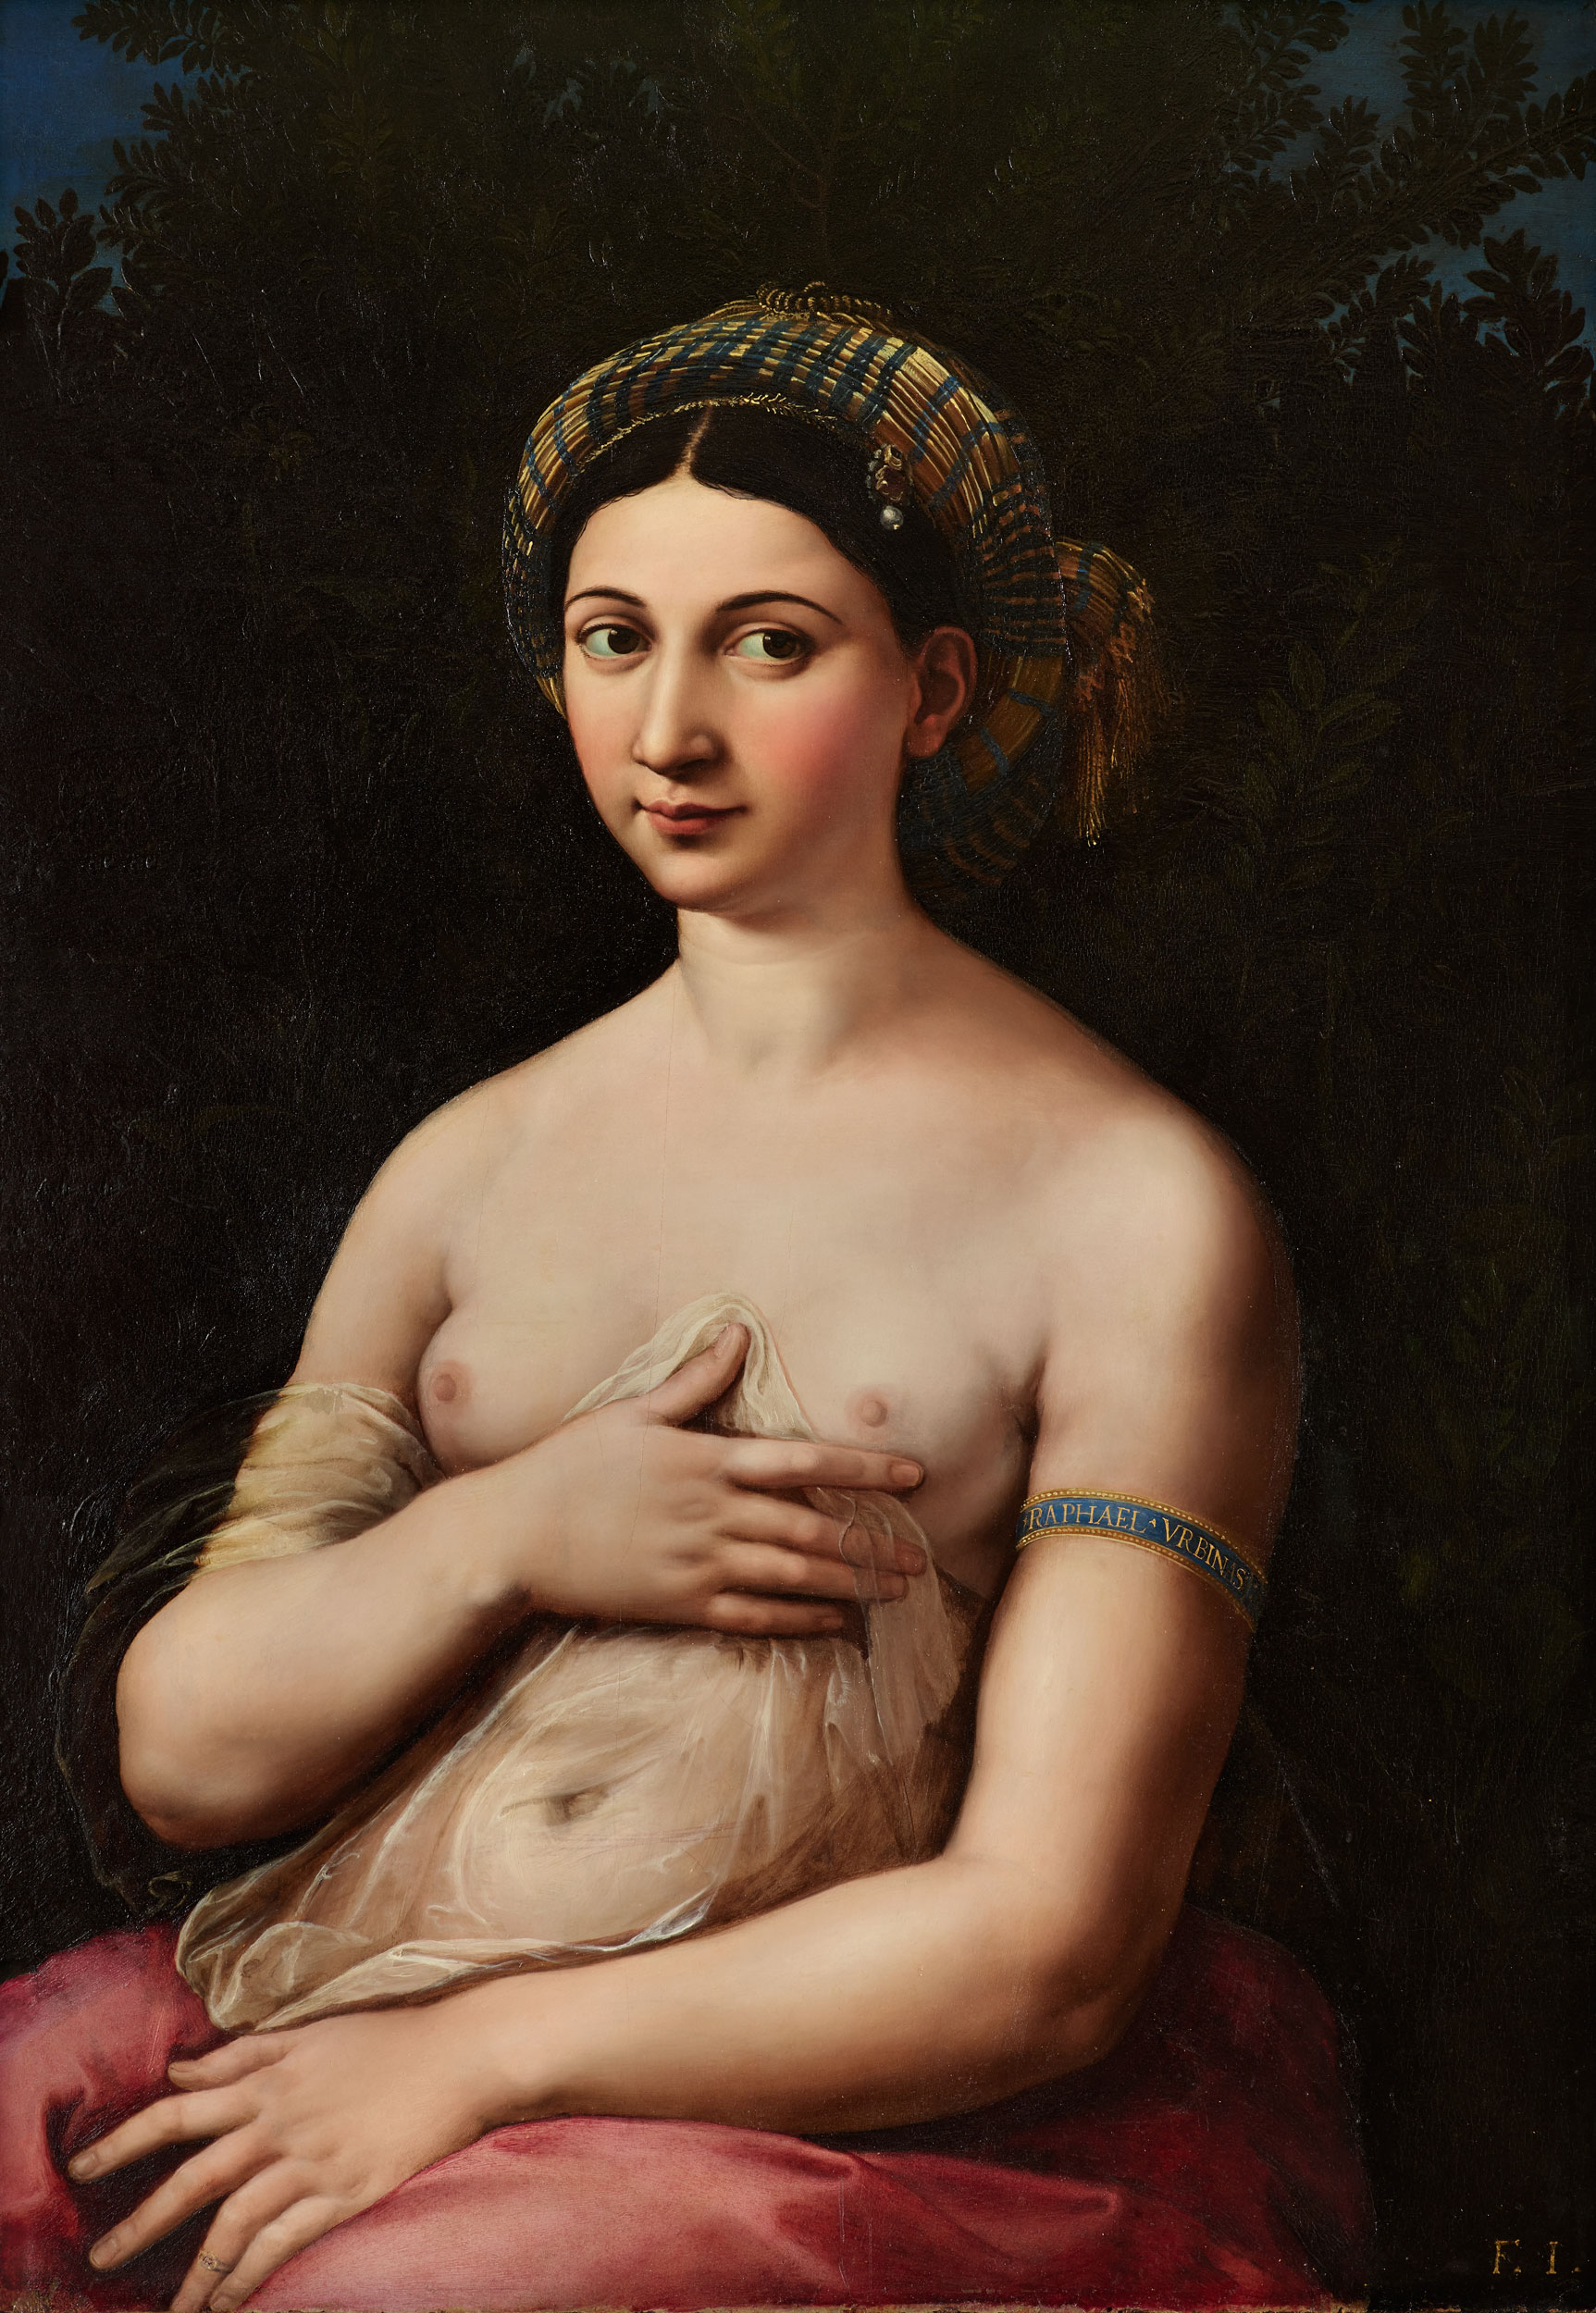 Raphael, Portrait of a Woman in the Clothes of Venus (Fornarina) (c. 1519-1520; oil on panel; Rome, Gallerie Nazionali dArte Antica di Roma, Barberini). National Galleries of Ancient Art, Rome (MIBACT) - Hertziana Library, Max Planck Institute for Art History/Enrico Fontolan